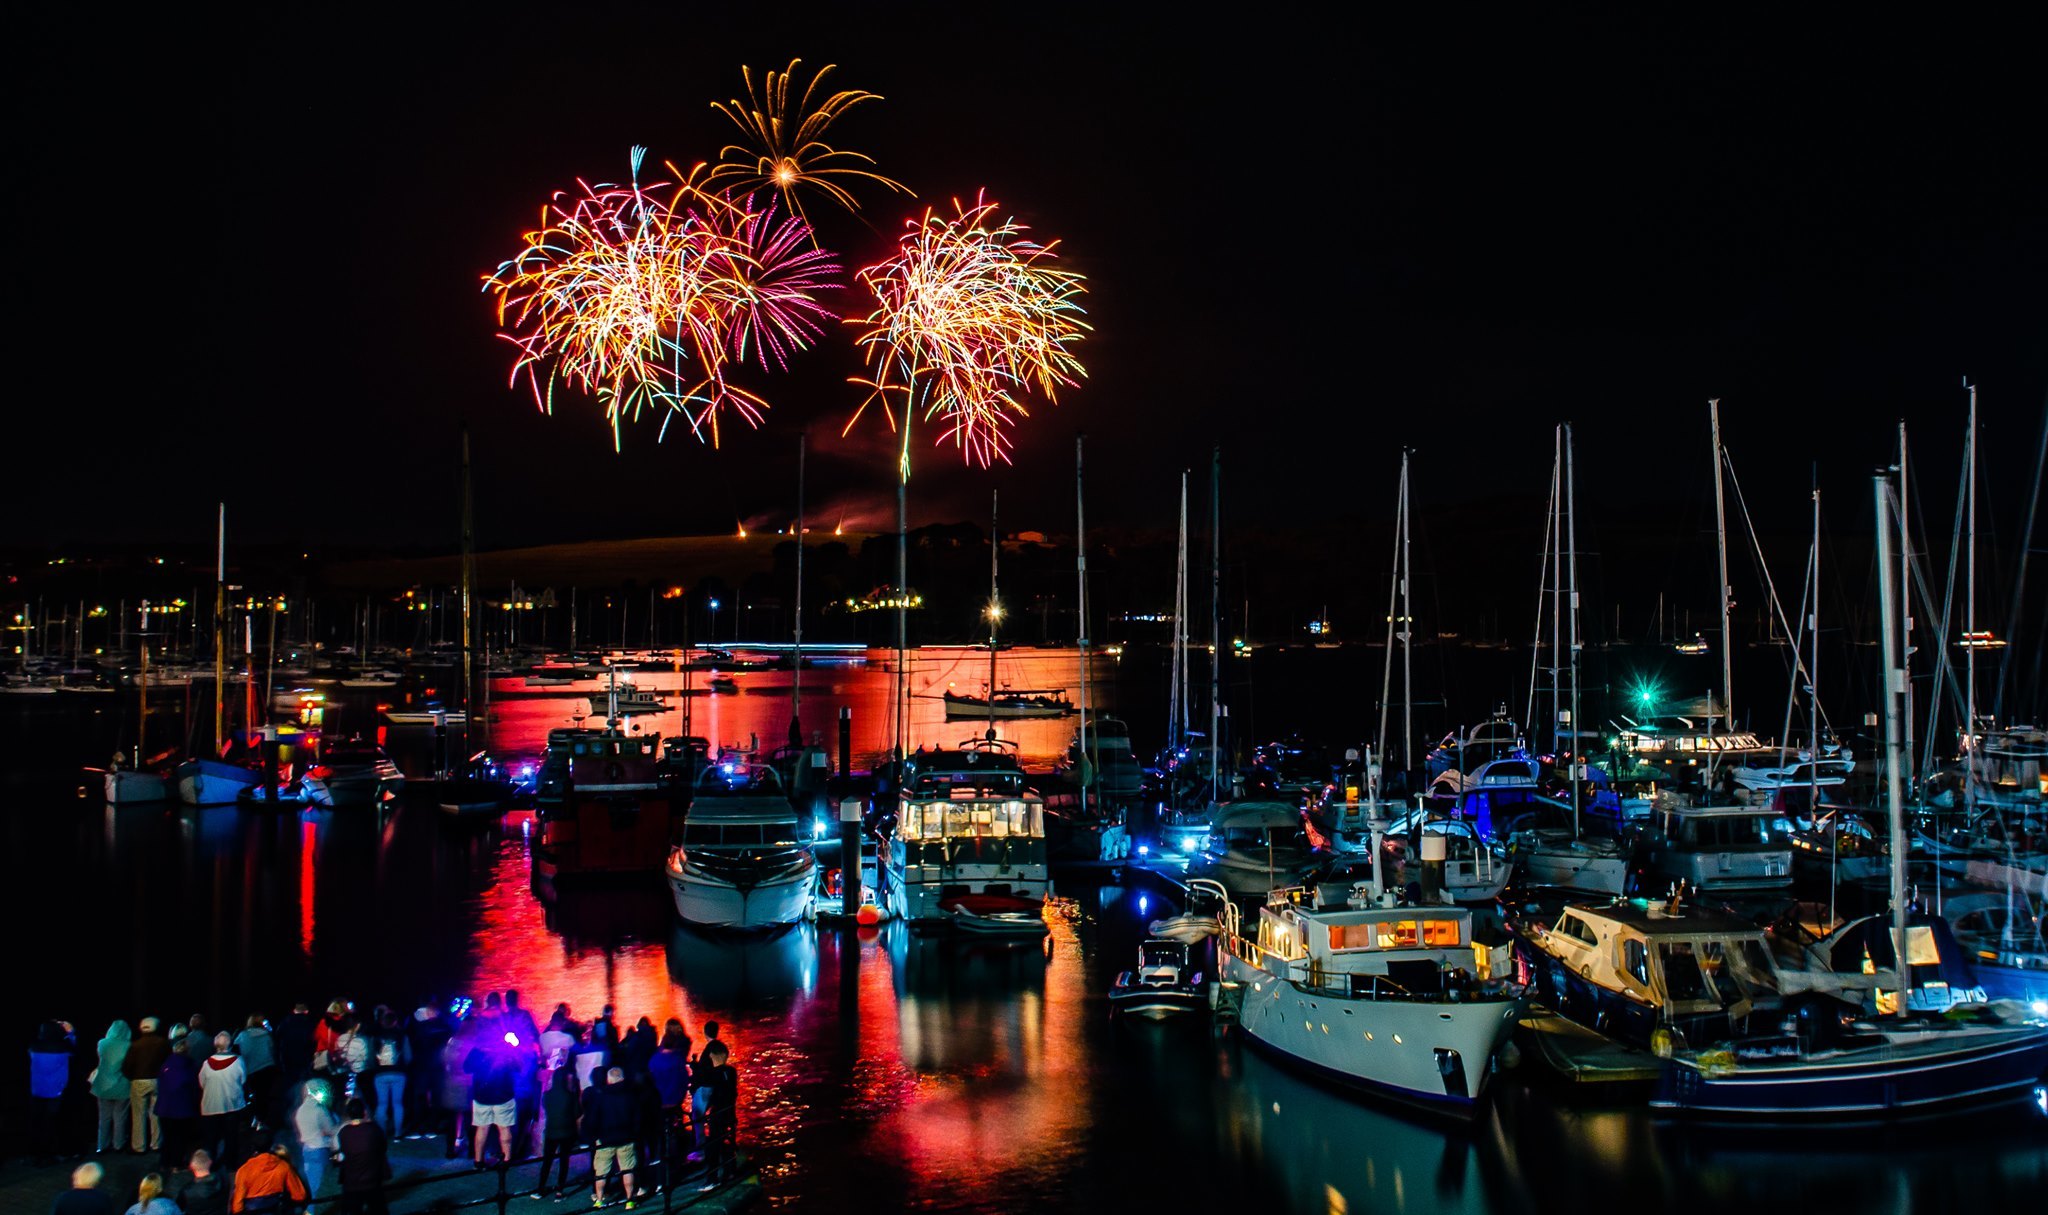 The Falmouth Week fireworks have been confirmed for Friday evening